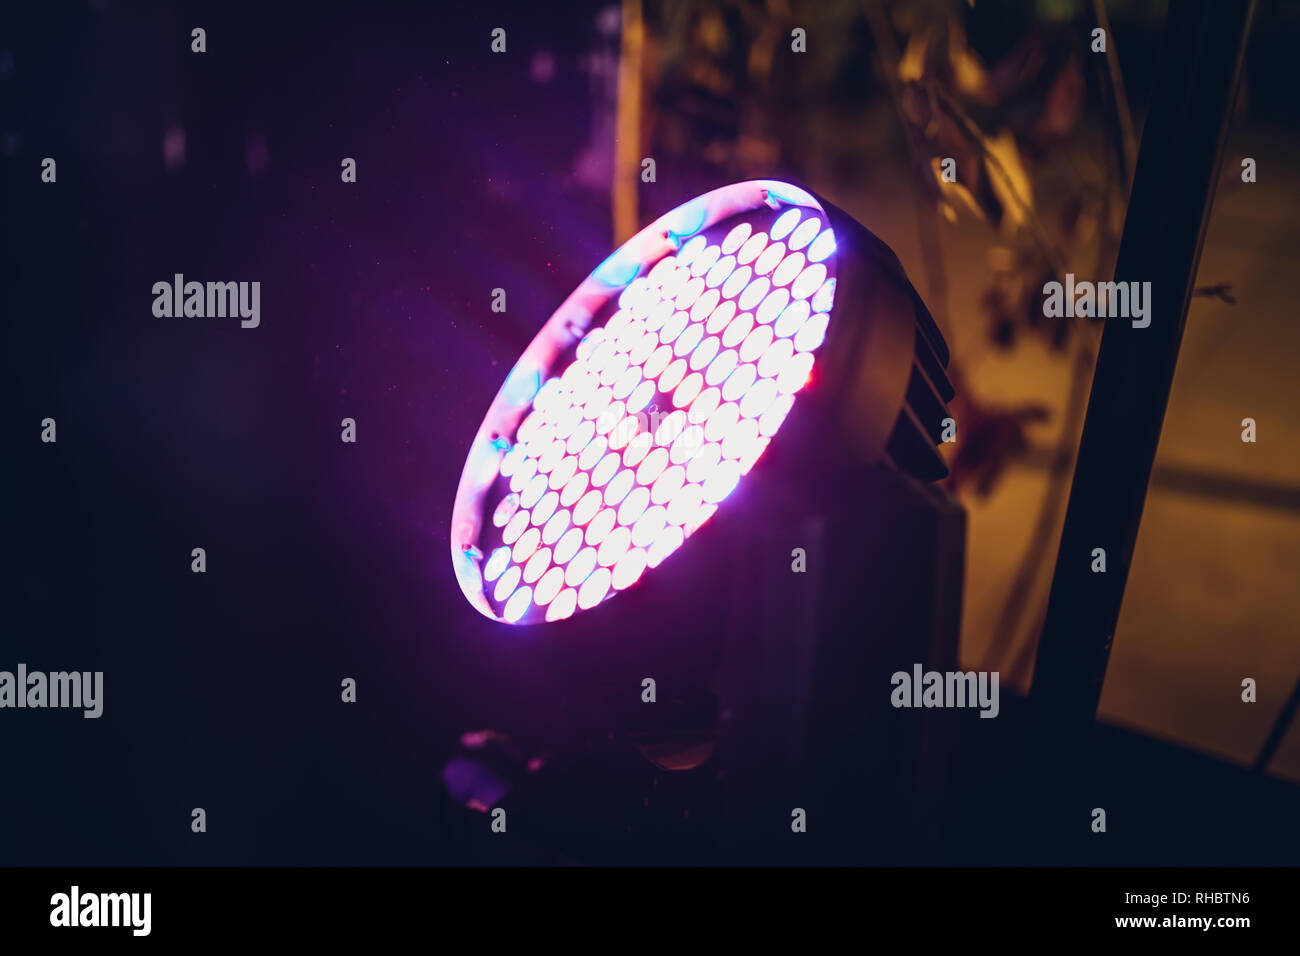 Stage led light or spot led lights at the concert, disco, club or bar.  Spotlight illuminate the area in the dark background Stock Photo - Alamy